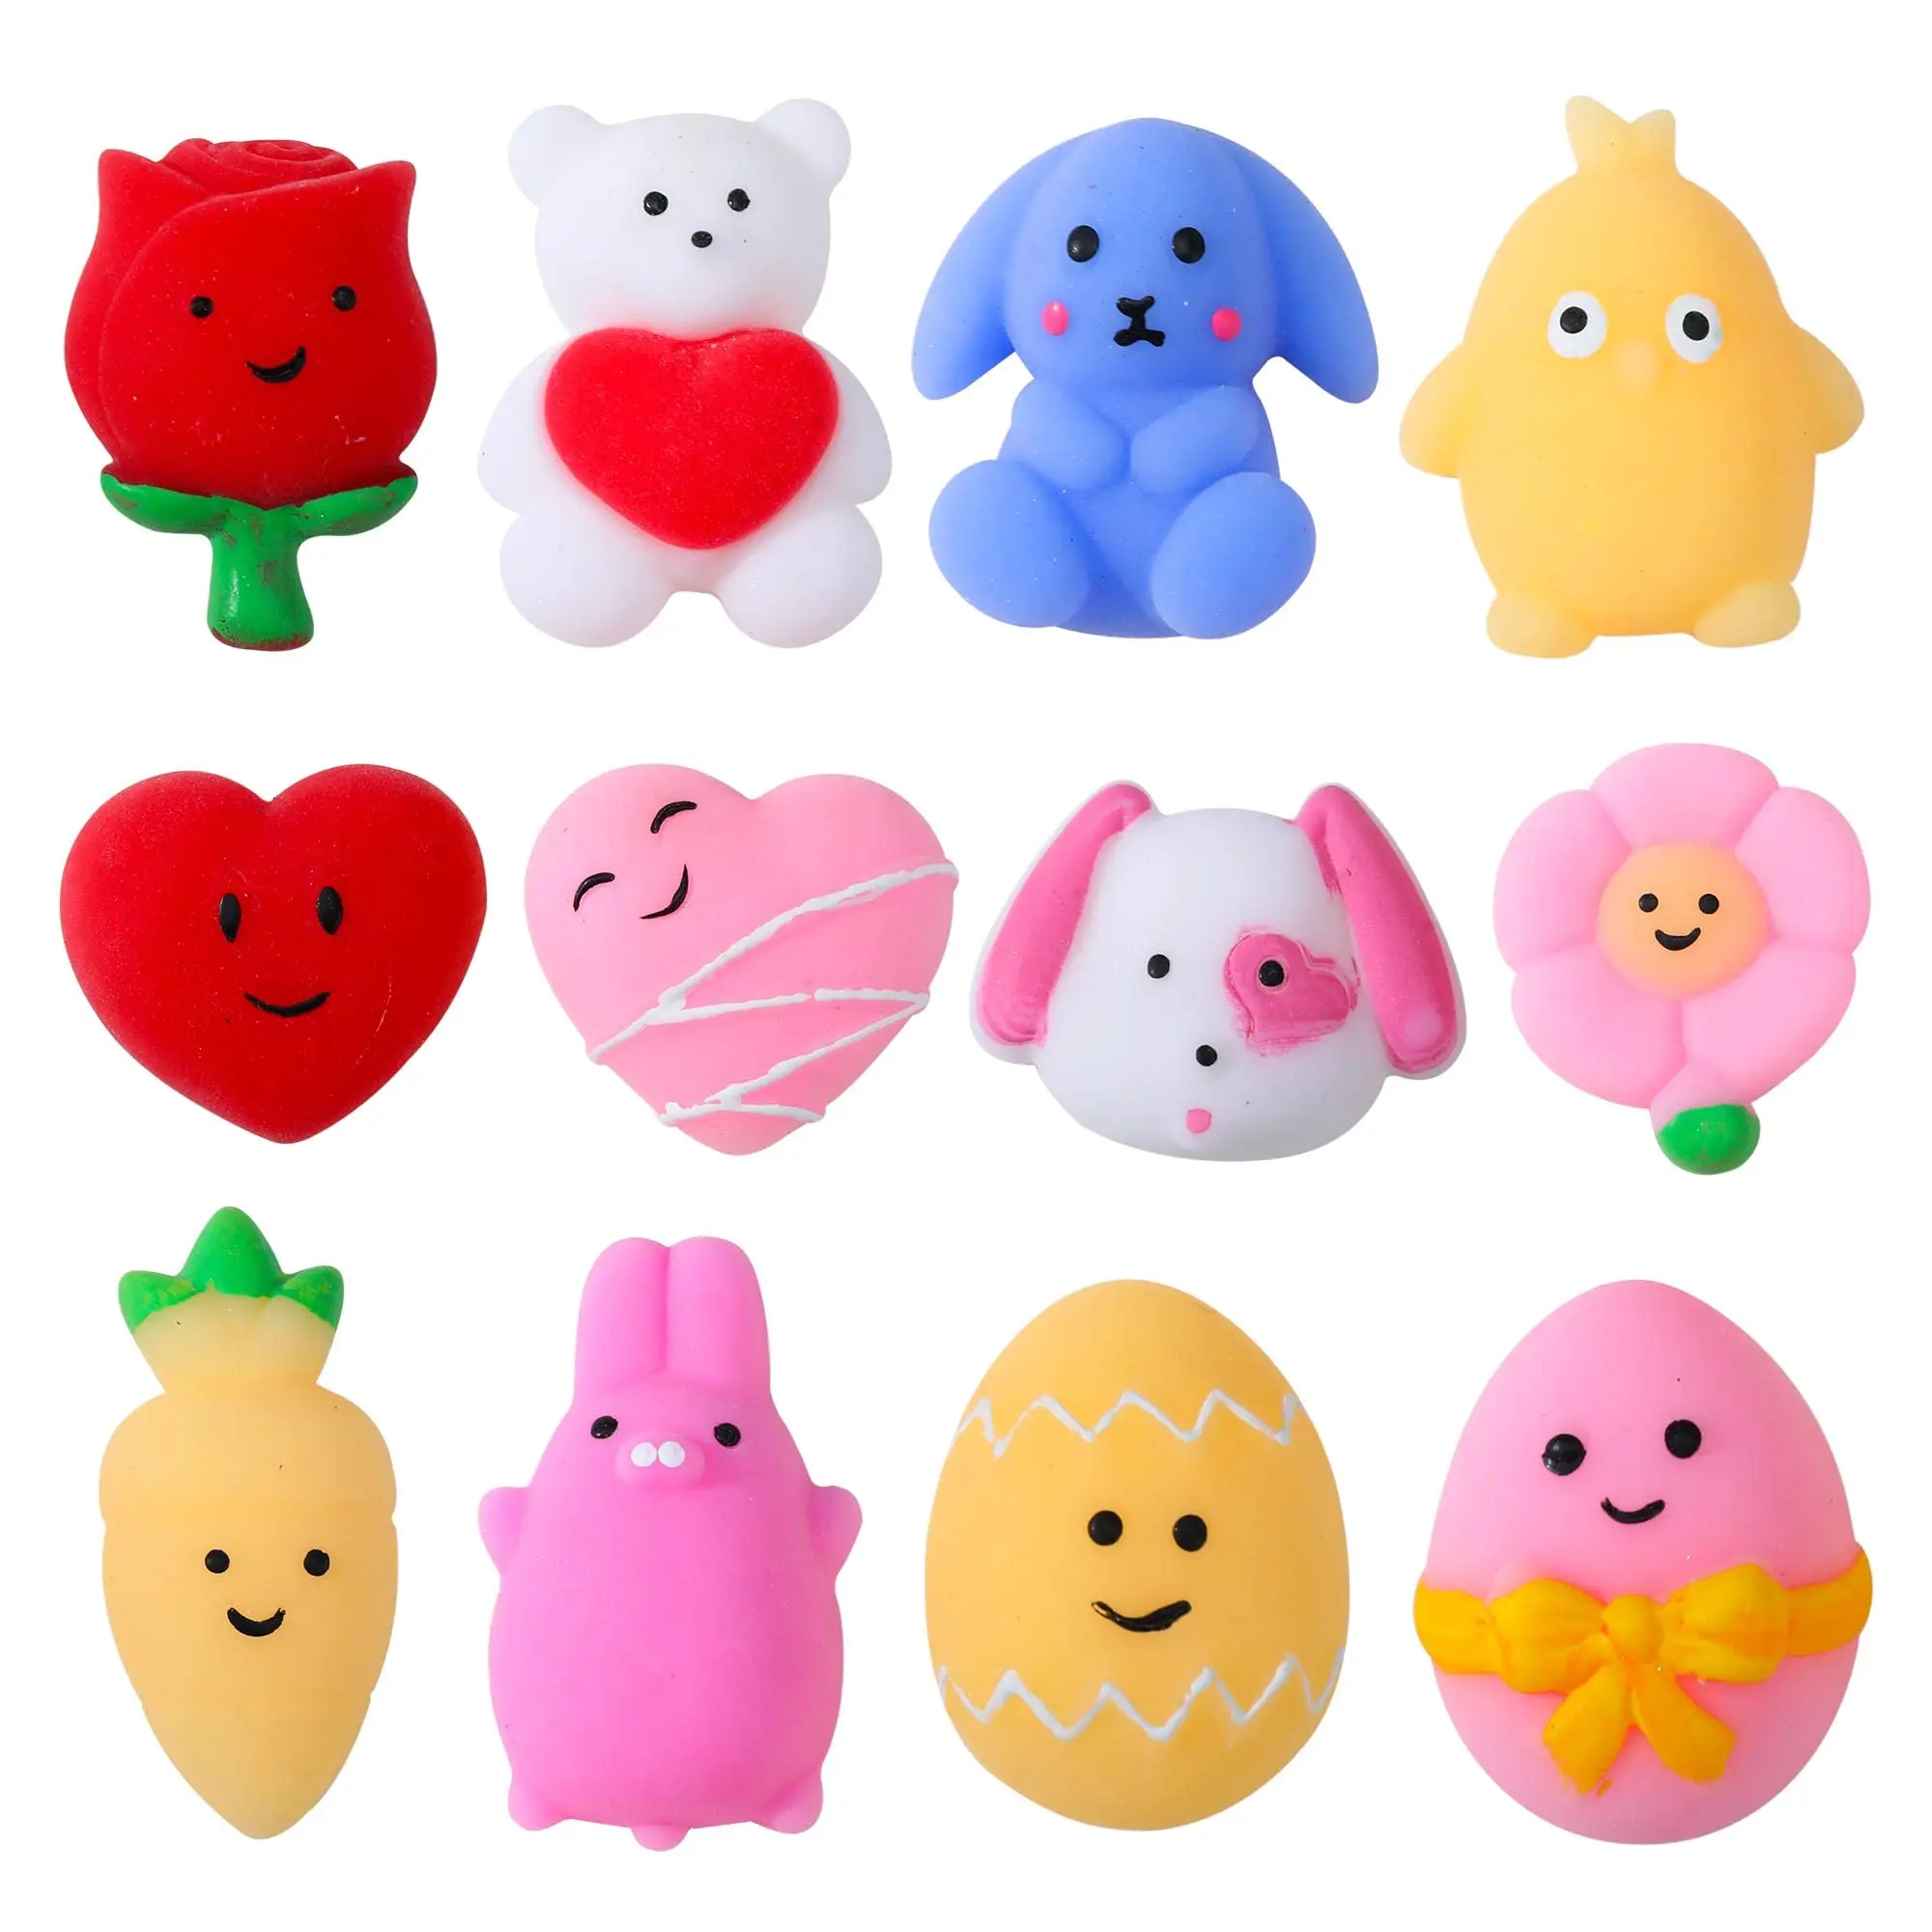 

12pcs Mochi Squishy Toy Easter Egg Fillers Basket Stuffers Sensory Fidget Toys Party Favors for Kids Valentines Classroom Gifts